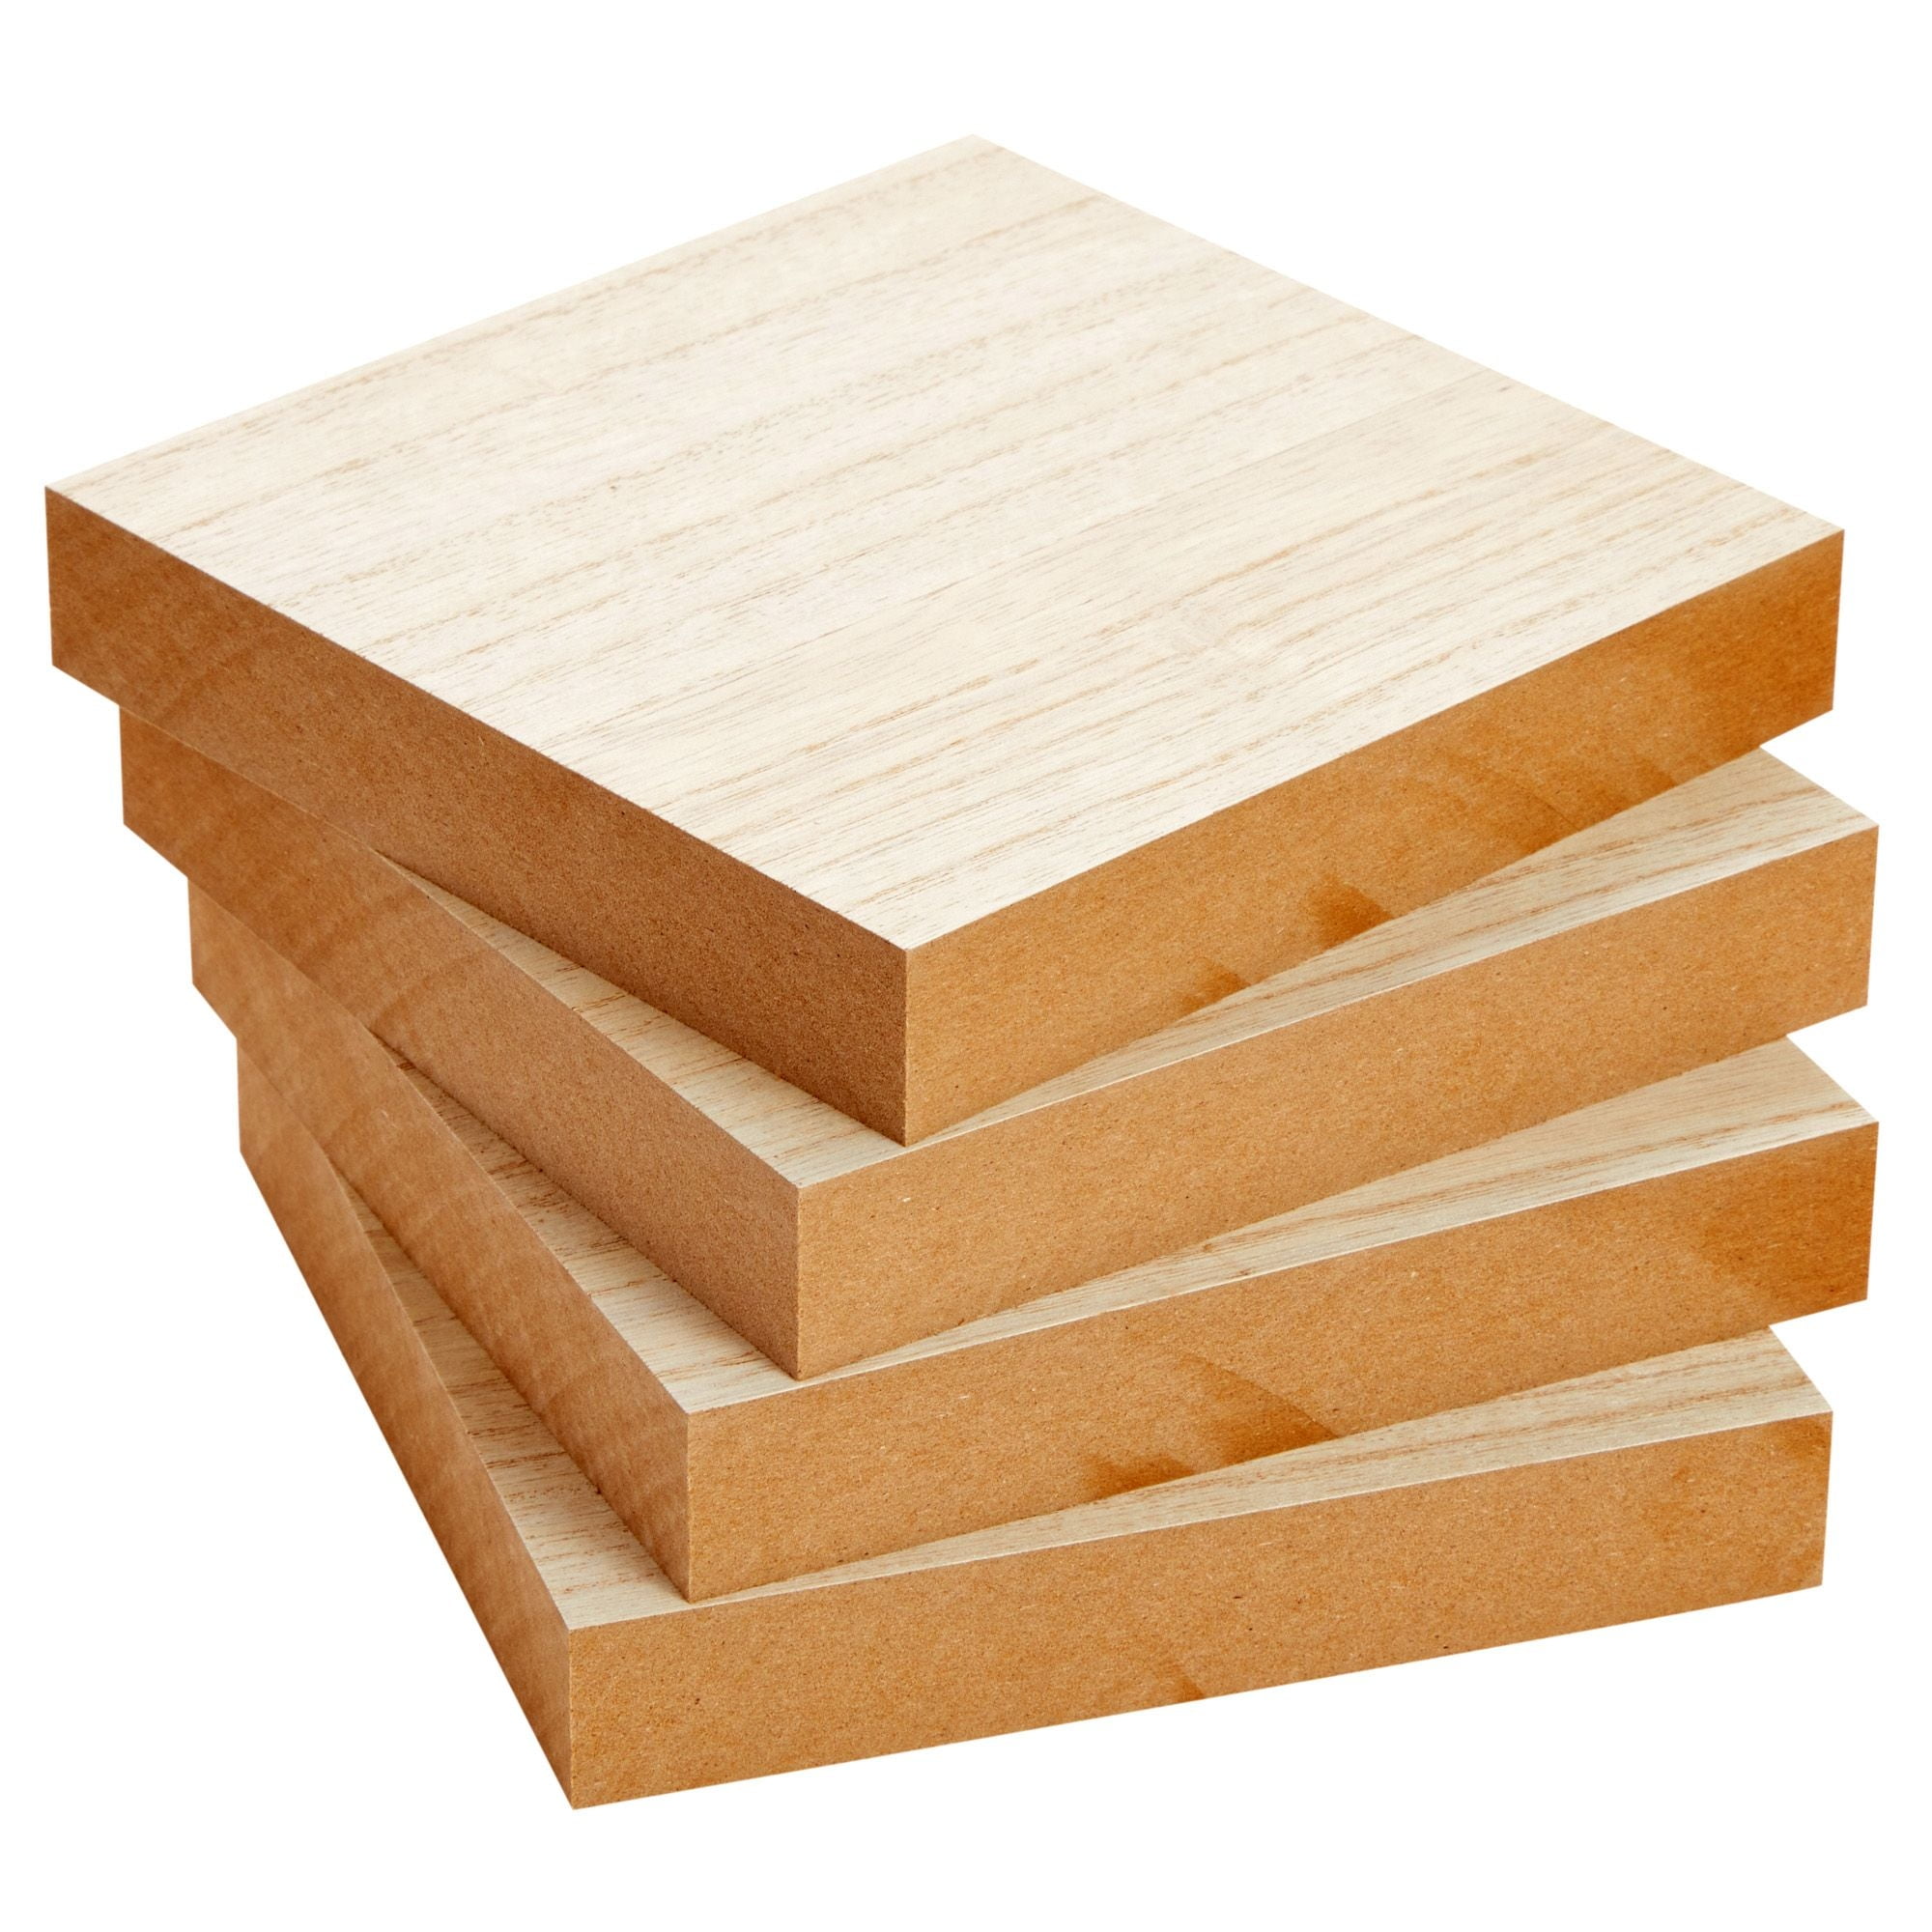 16 Pack Unfinished Wood Blocks for Crafts, 4 x 4 x 1 inch Pine Wood Board Wooden Square Blocks Craft Panels for Art and Crafts, Engraving, Painting, D